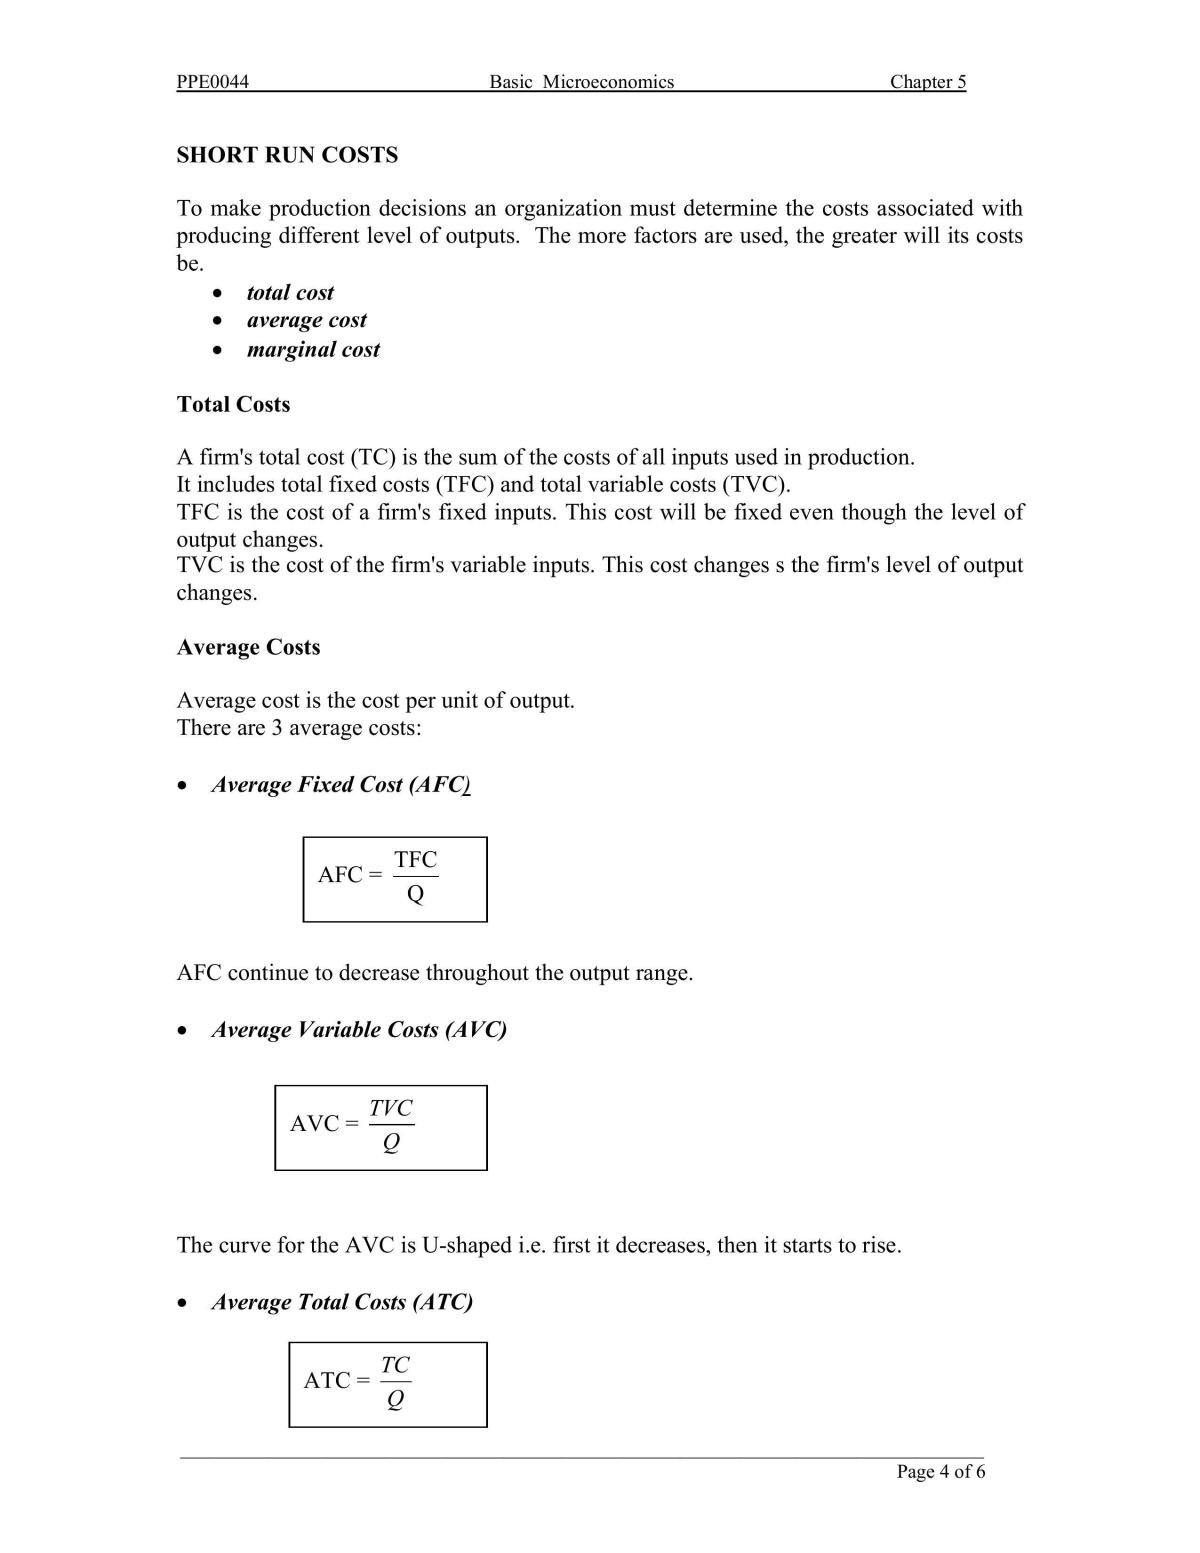 Basic Microeconomics Notes - Page 27